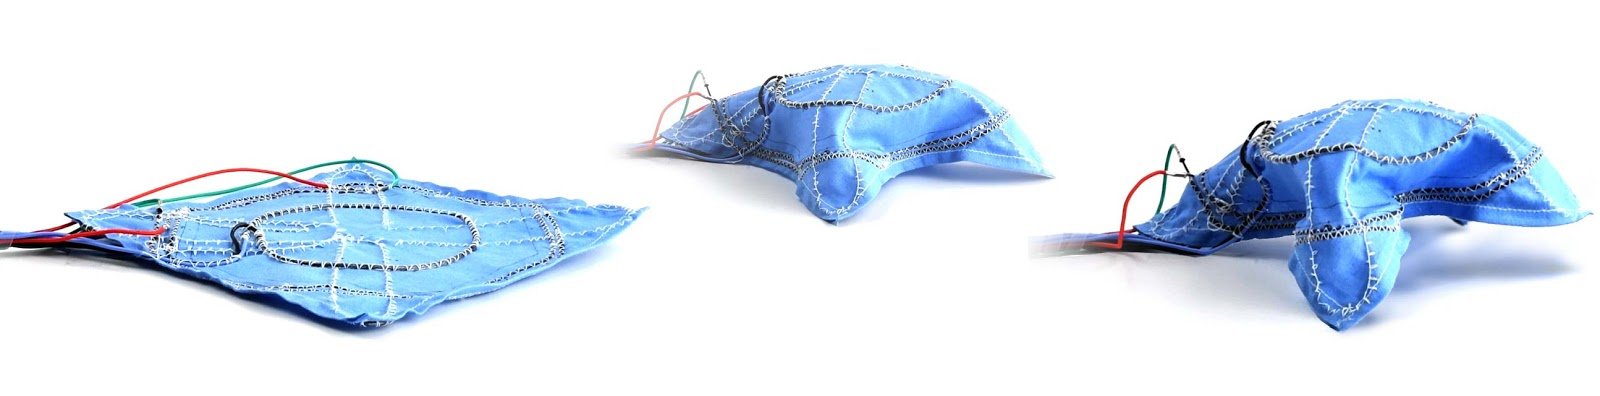 Will this be the future of fashion? New Robotic fabric responds to temperature changes